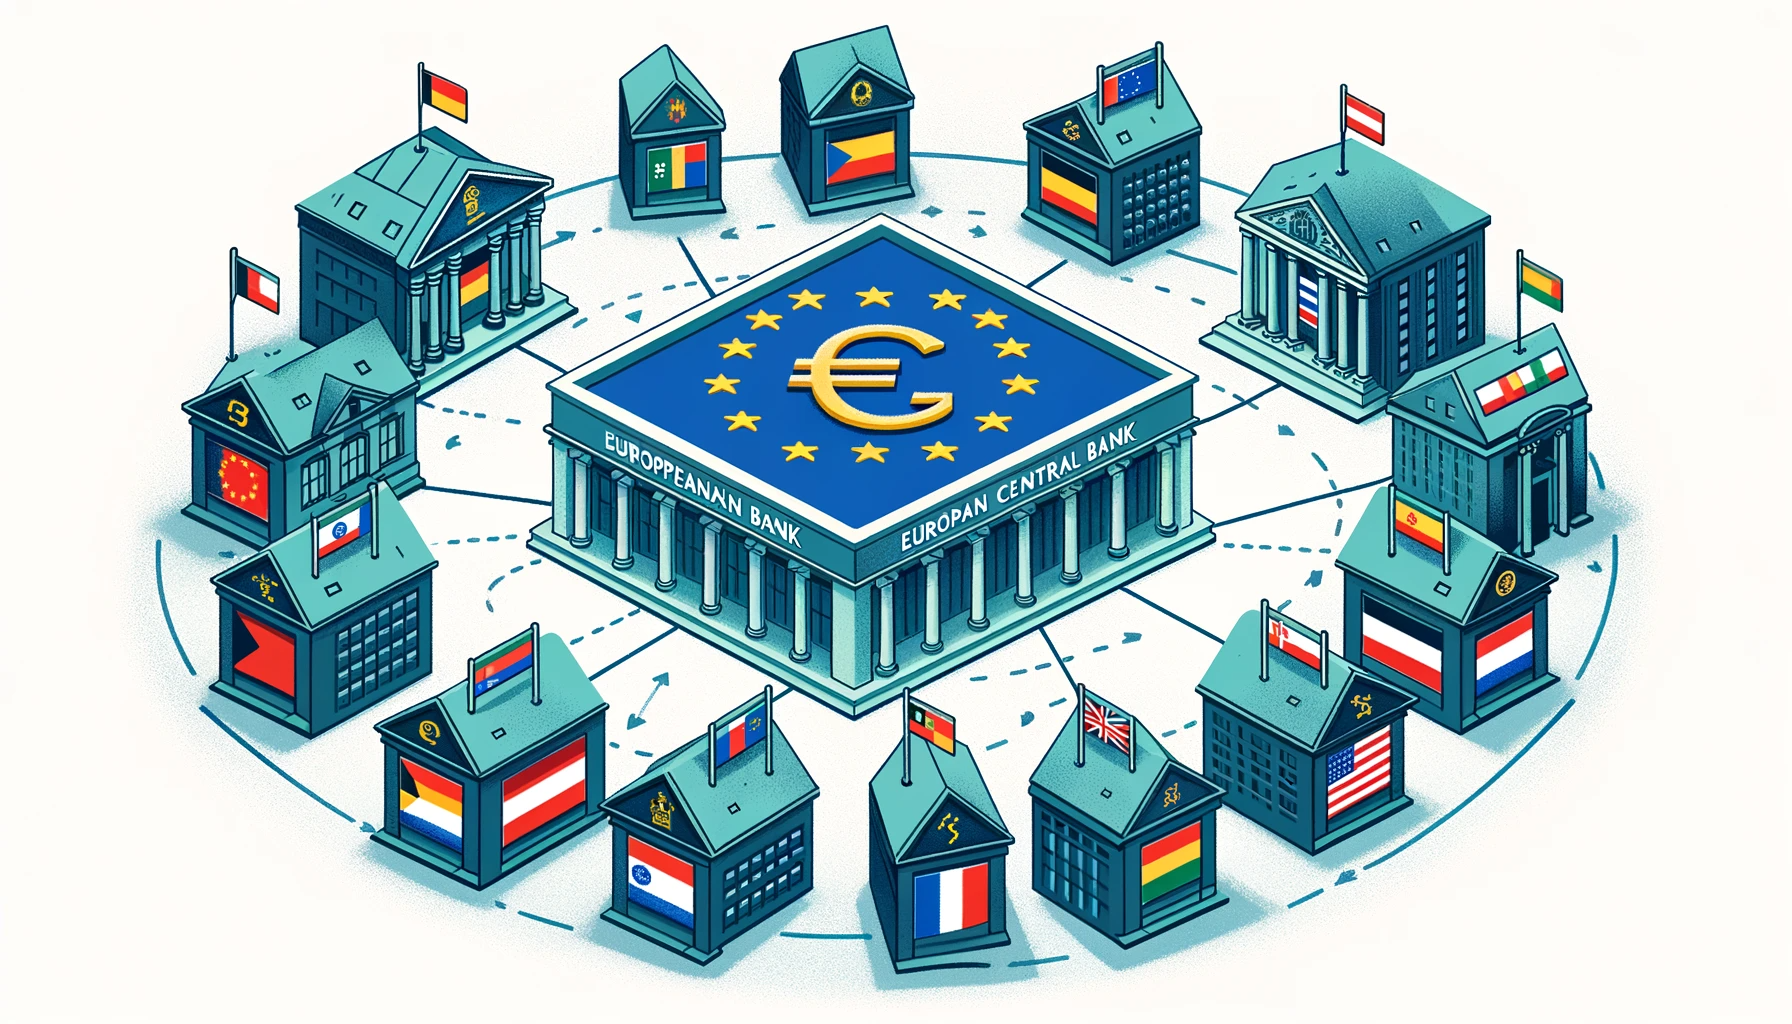 European Central Bank: Key Institution of the European Union - News